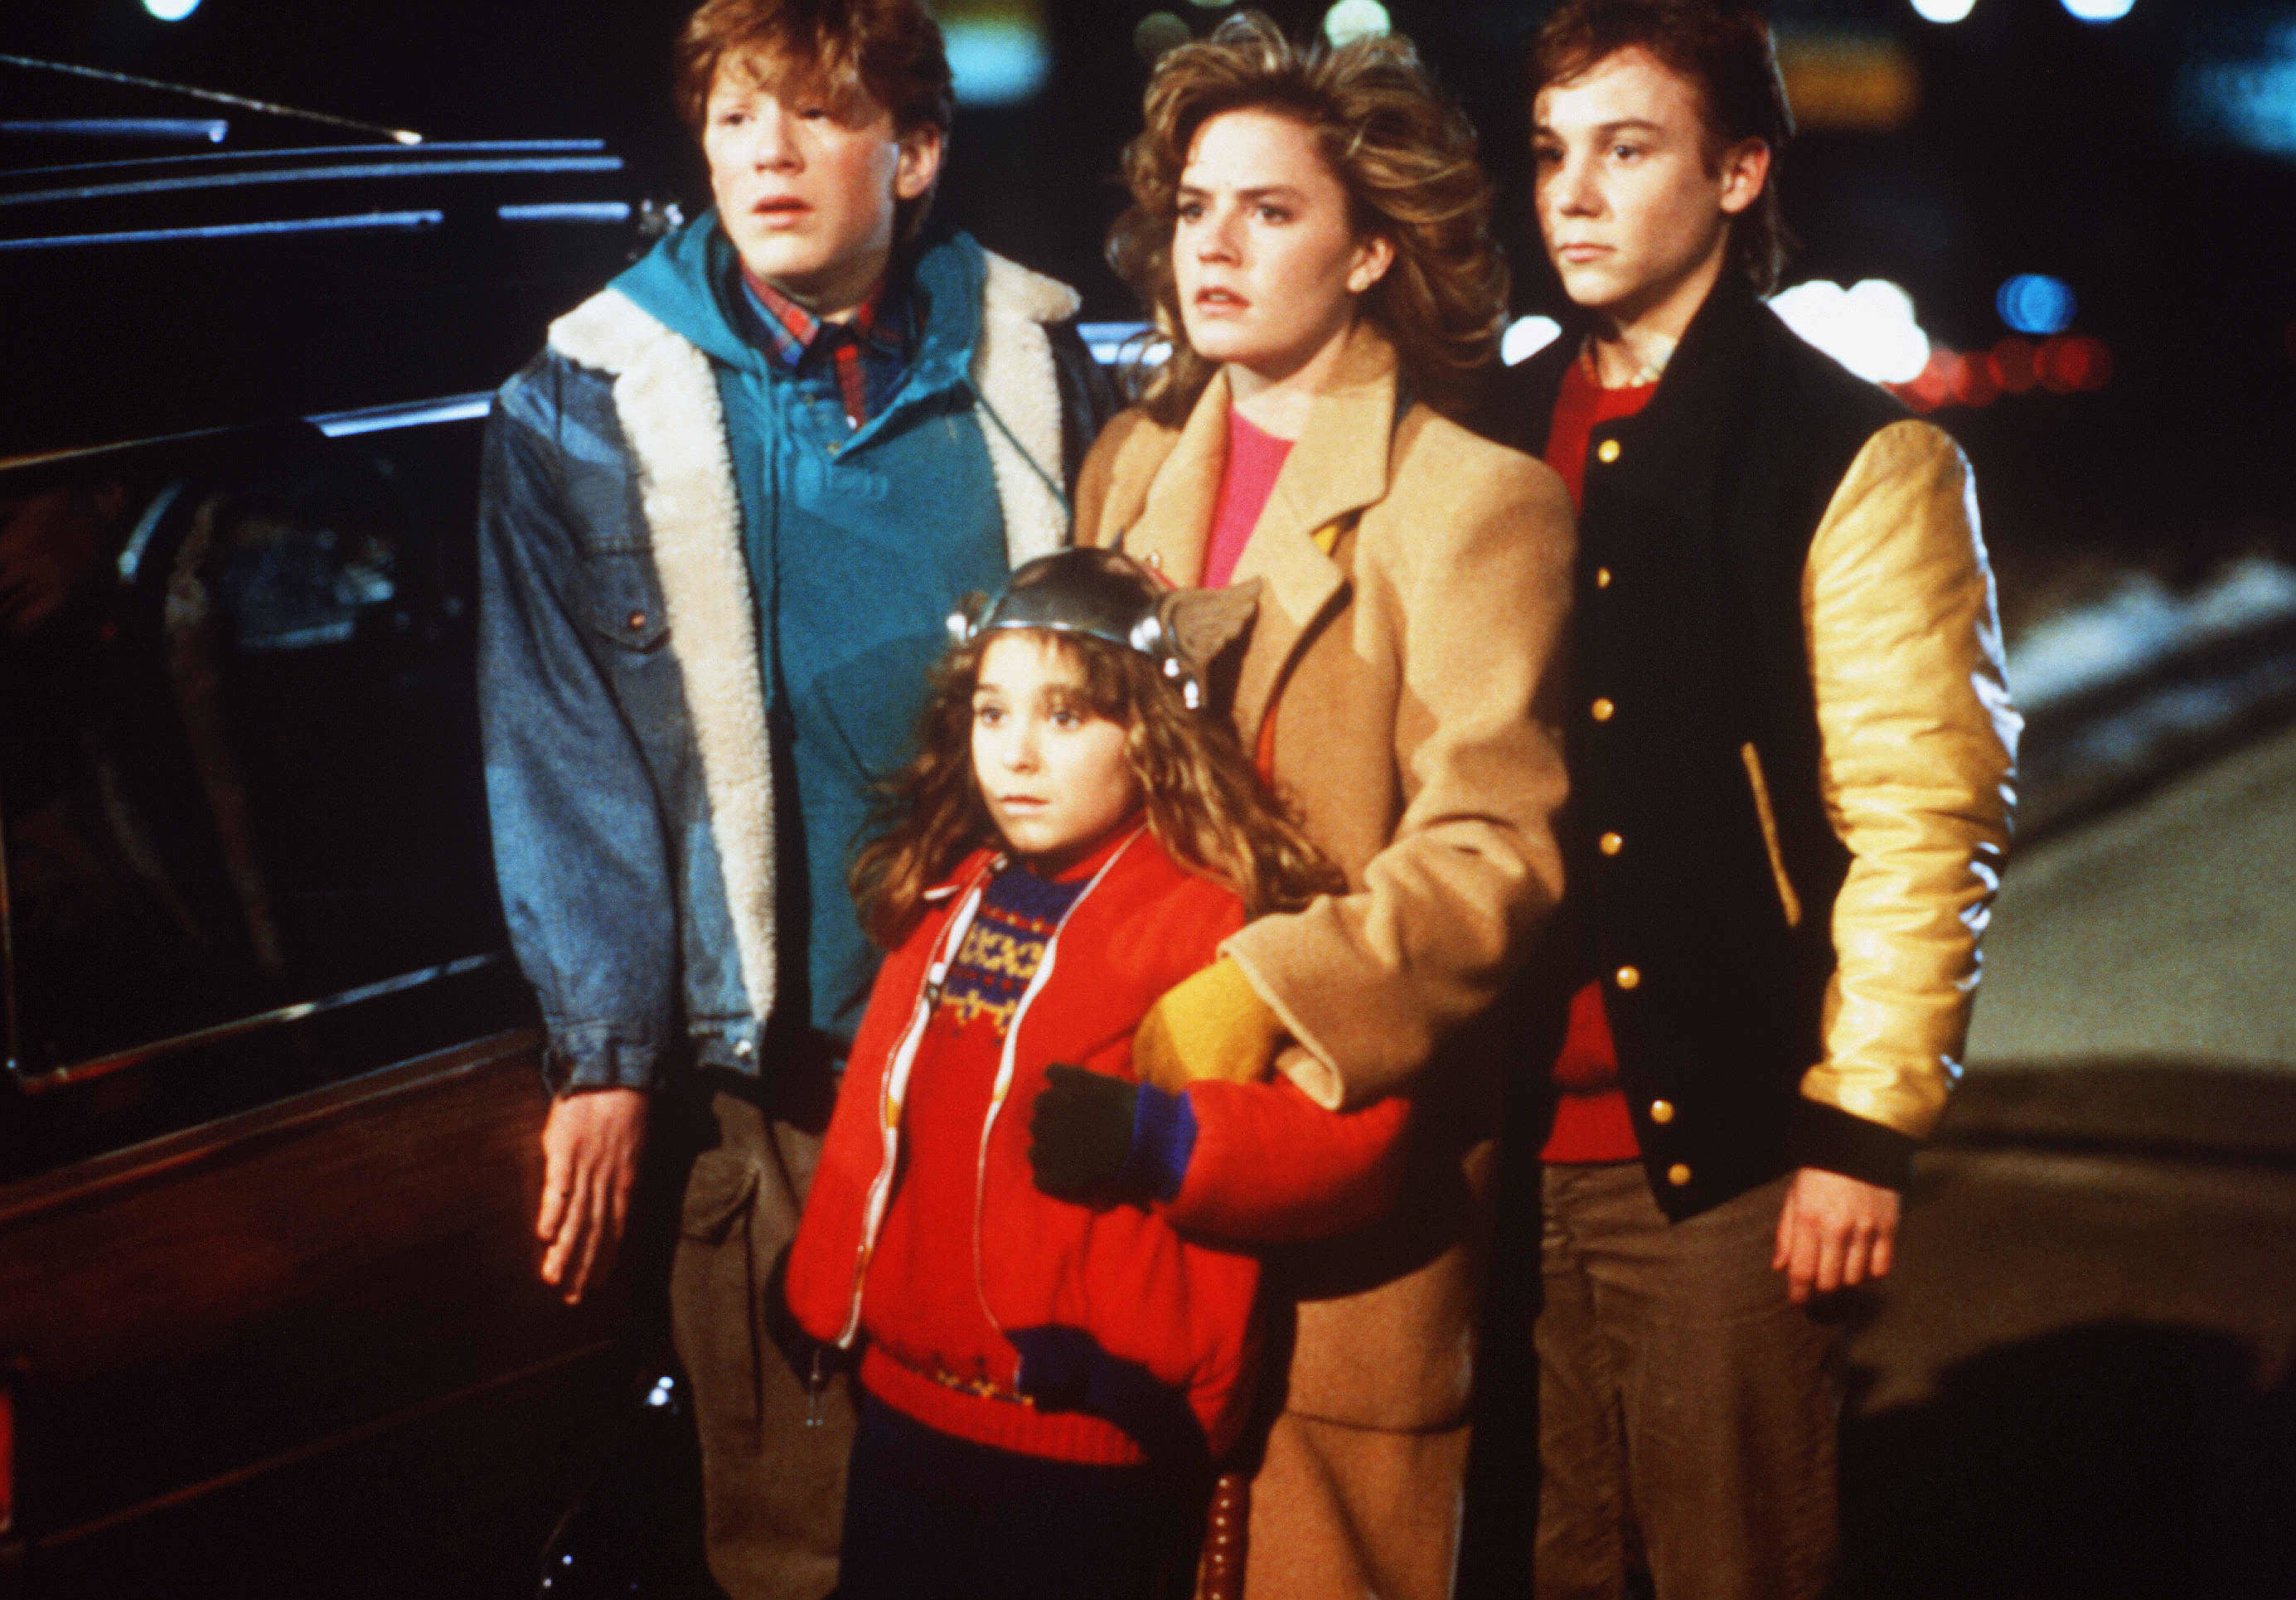 <p>Maia Brewton is best known for her turn as Thor-loving Sara Anderson in the classic comedy "Adventures in Babysitting" (pictured). Prior to the 1987 film, she also played Sally Baines in "Back to the Future."</p>